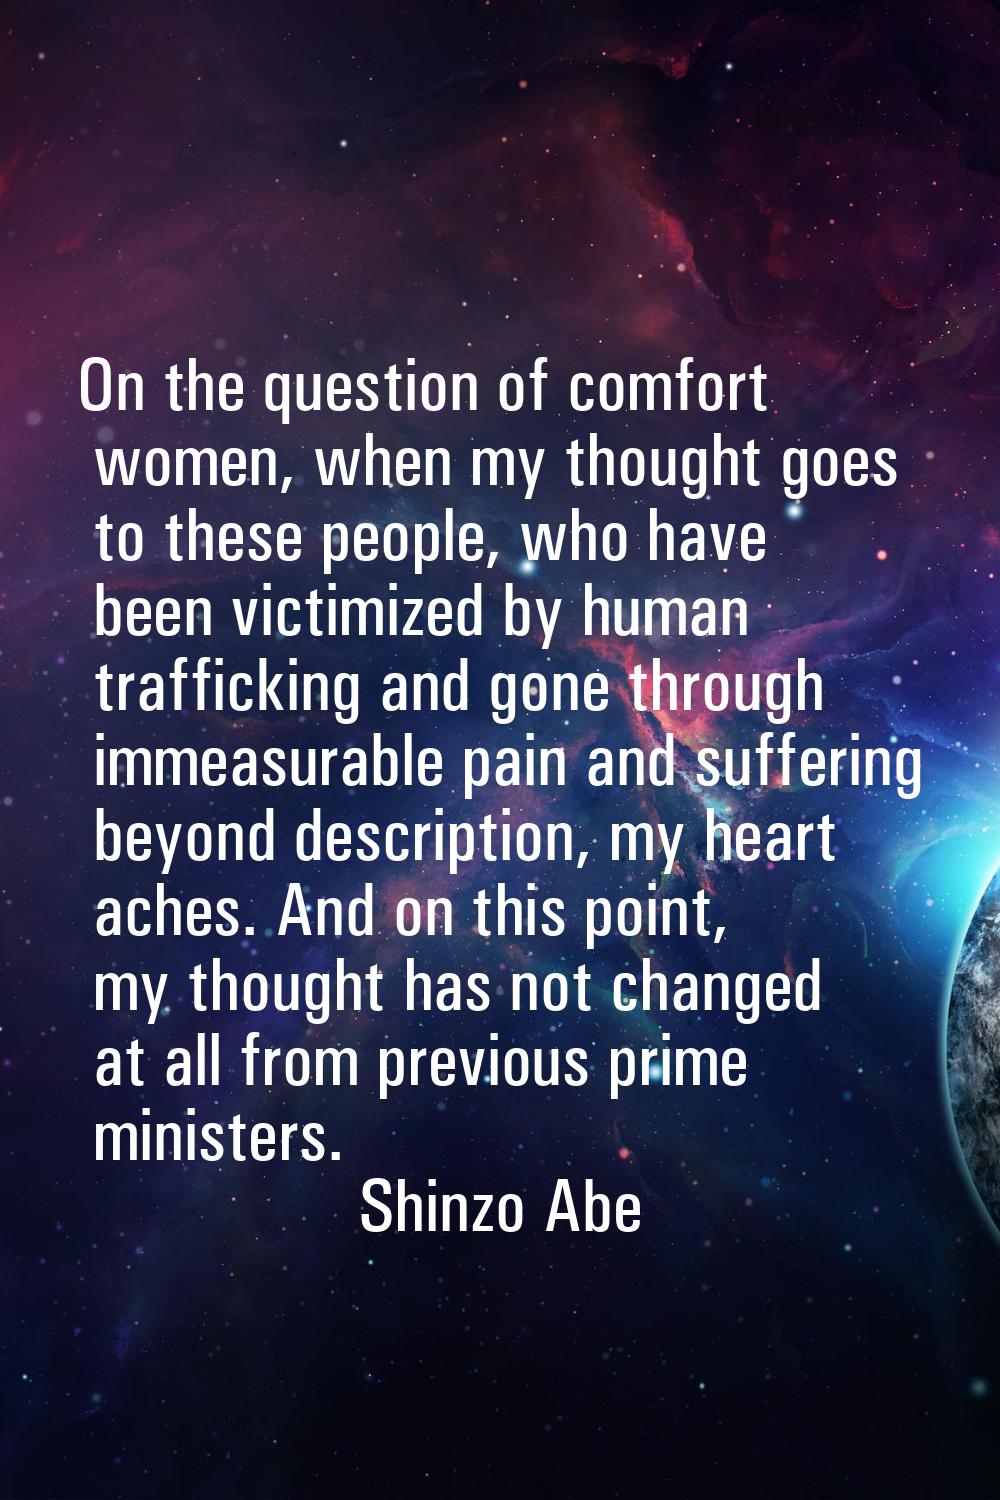 On the question of comfort women, when my thought goes to these people, who have been victimized by